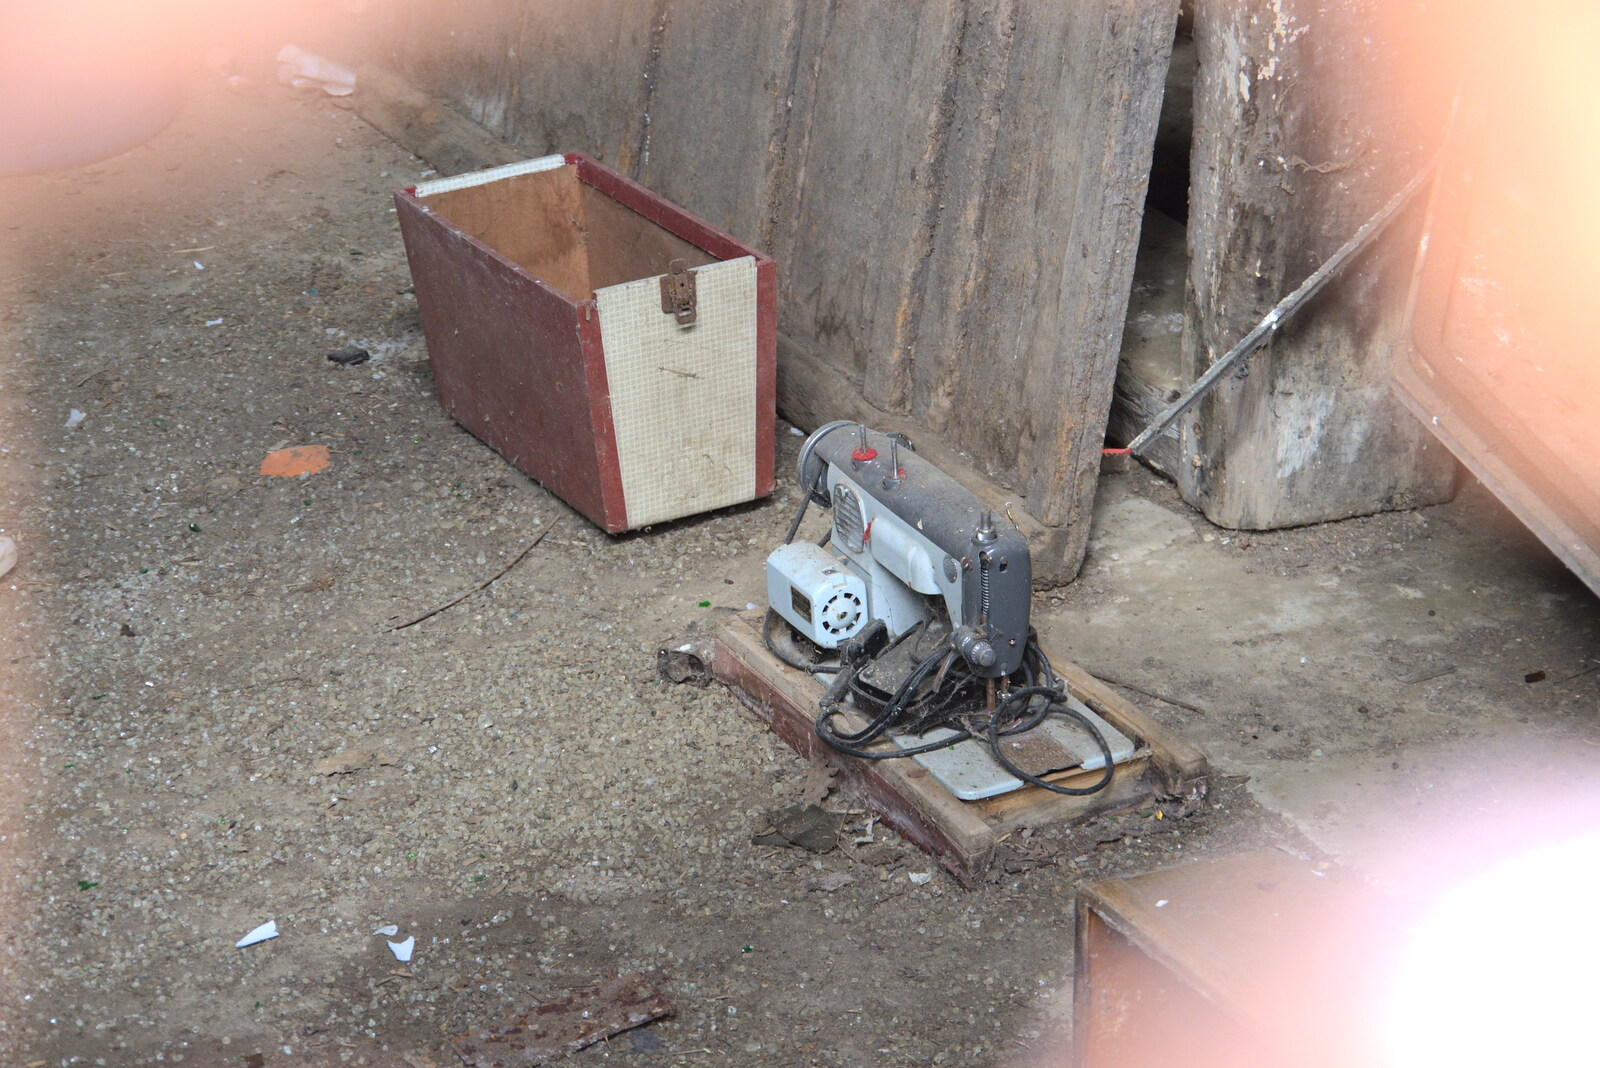 There's a discarded sewing machine on the floor from Another Walk on Eye Airfield, Eye, Suffolk - 14th March 2021